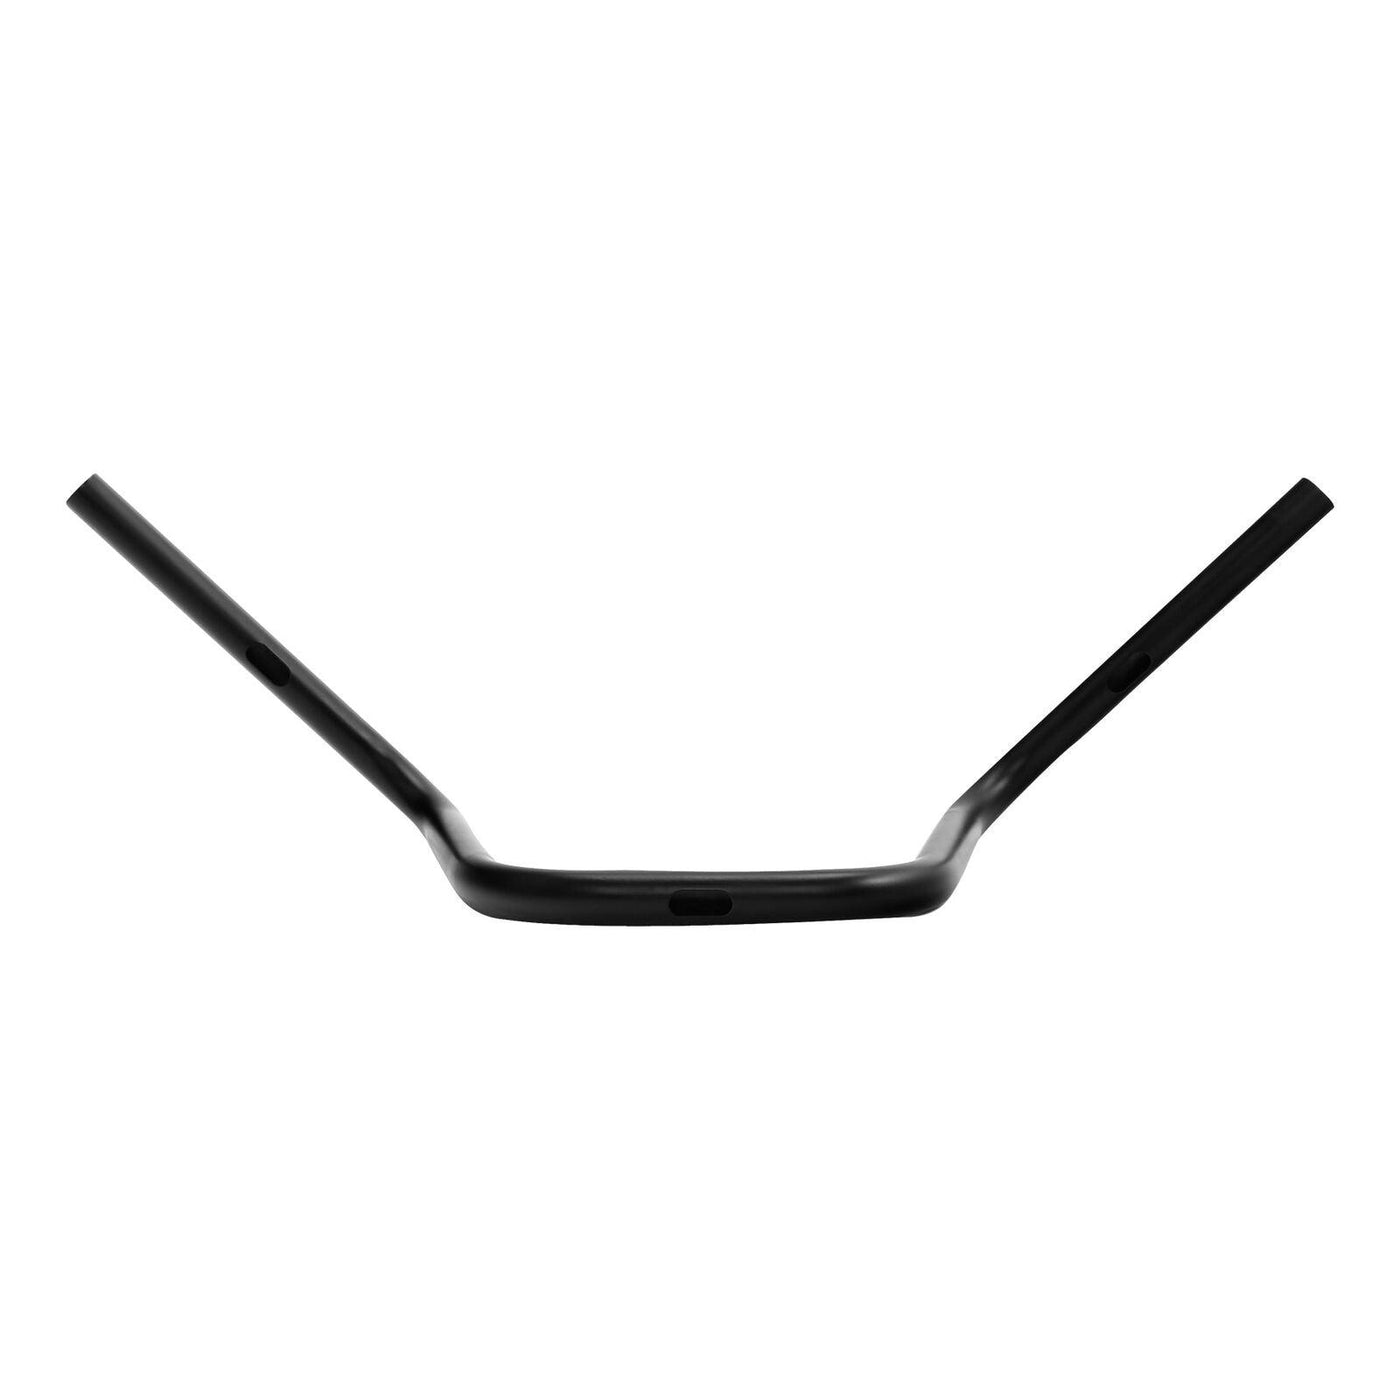 Matte Black 1'' Handle Bar Handlebars Fit For Harley Touring Road King FLHR Dyna - Moto Life Products